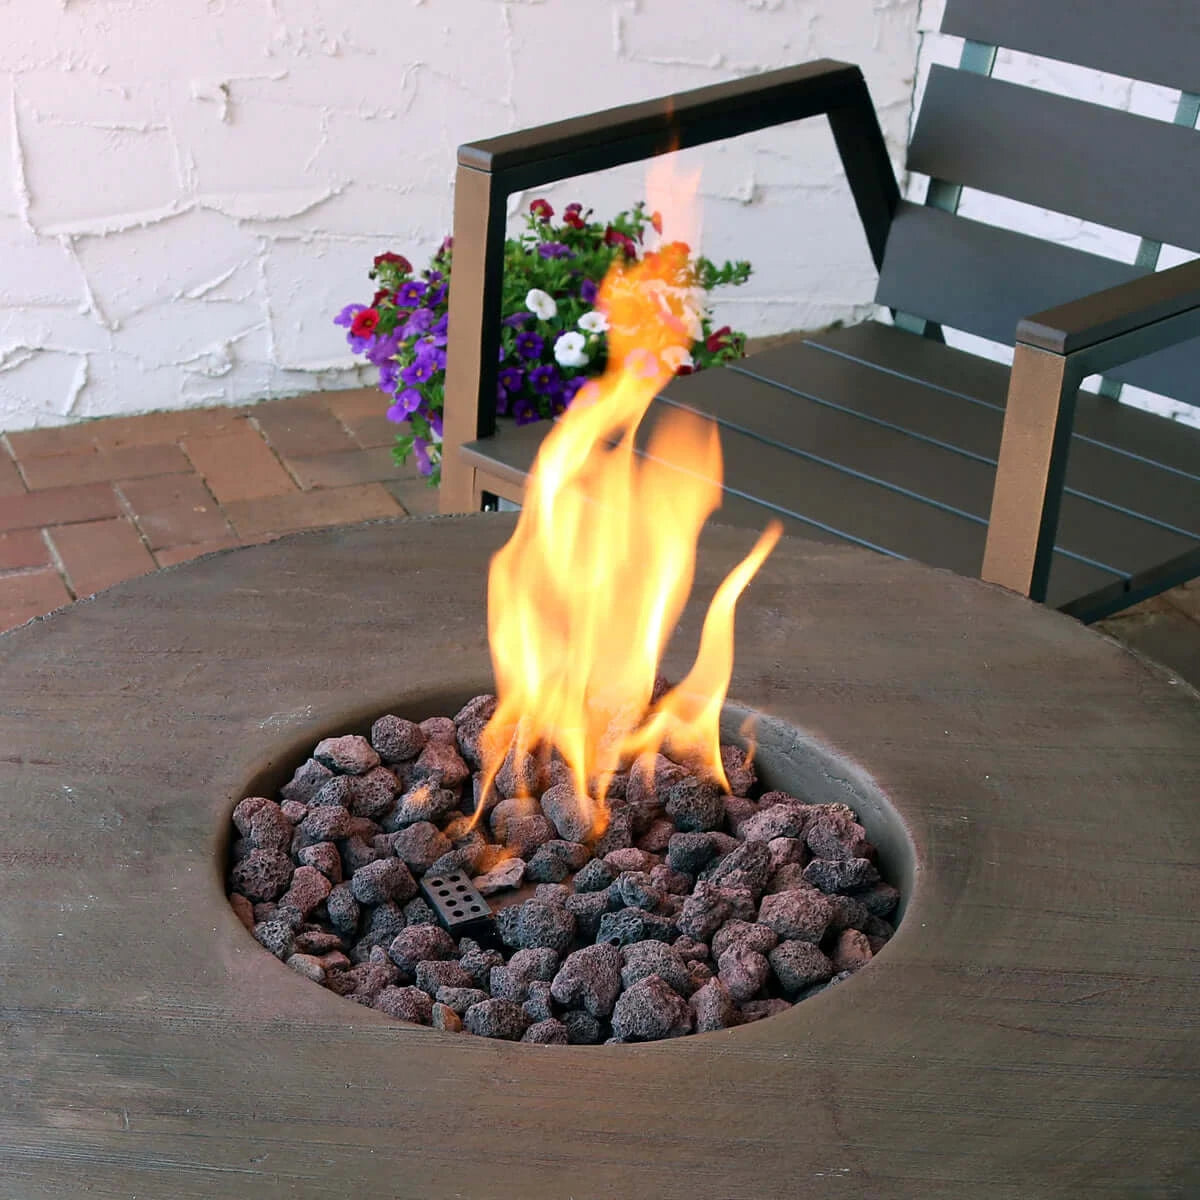 29" Rope and Barrel Fire Pit Table with Lava Rocks | Smokeless